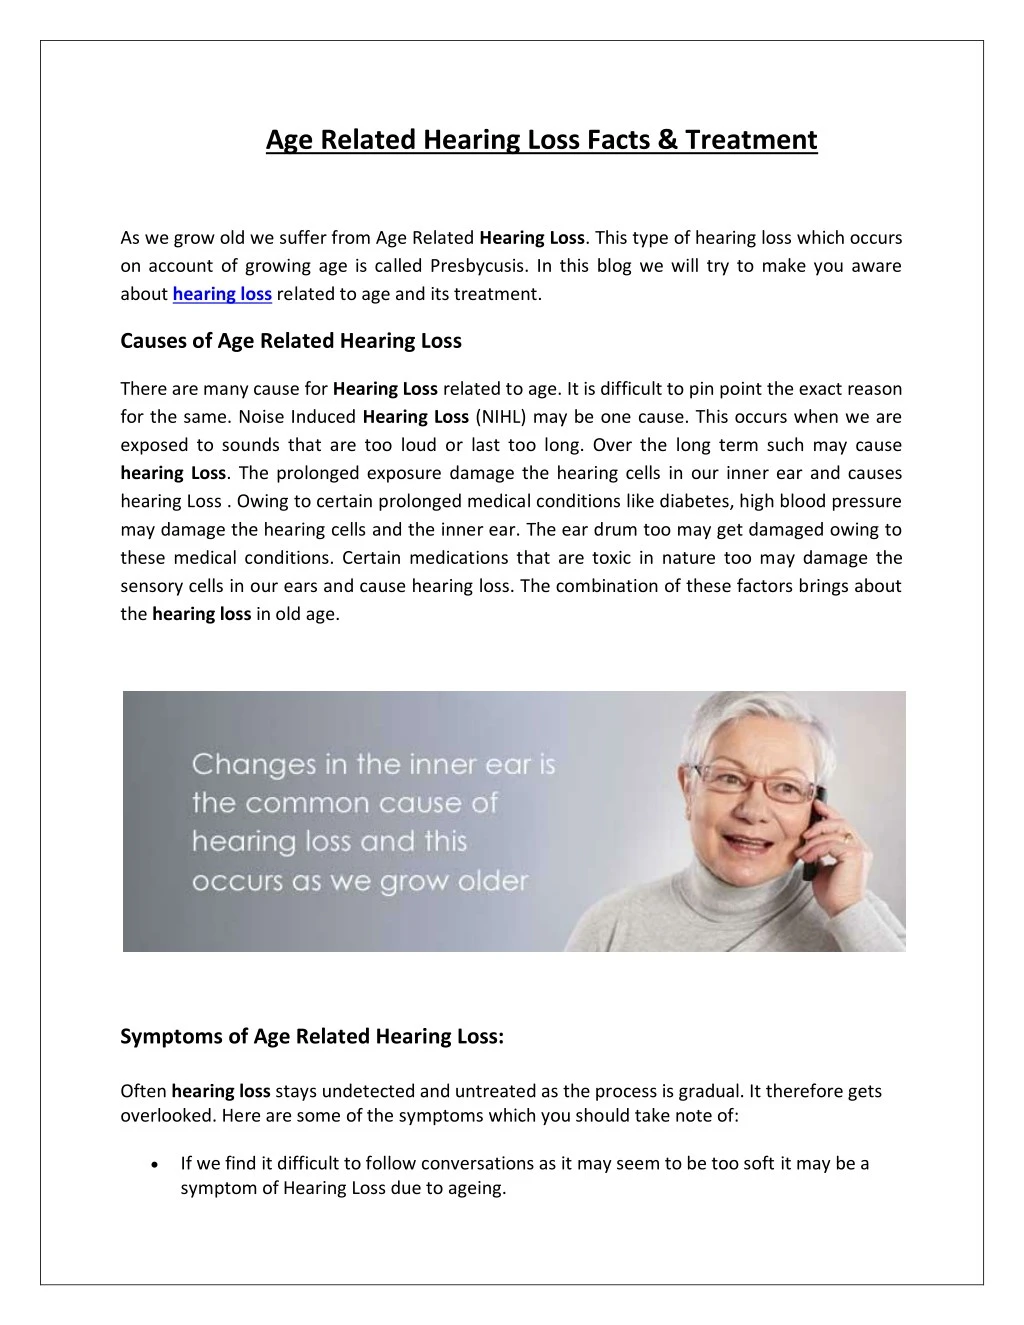 age related hearing loss facts treatment